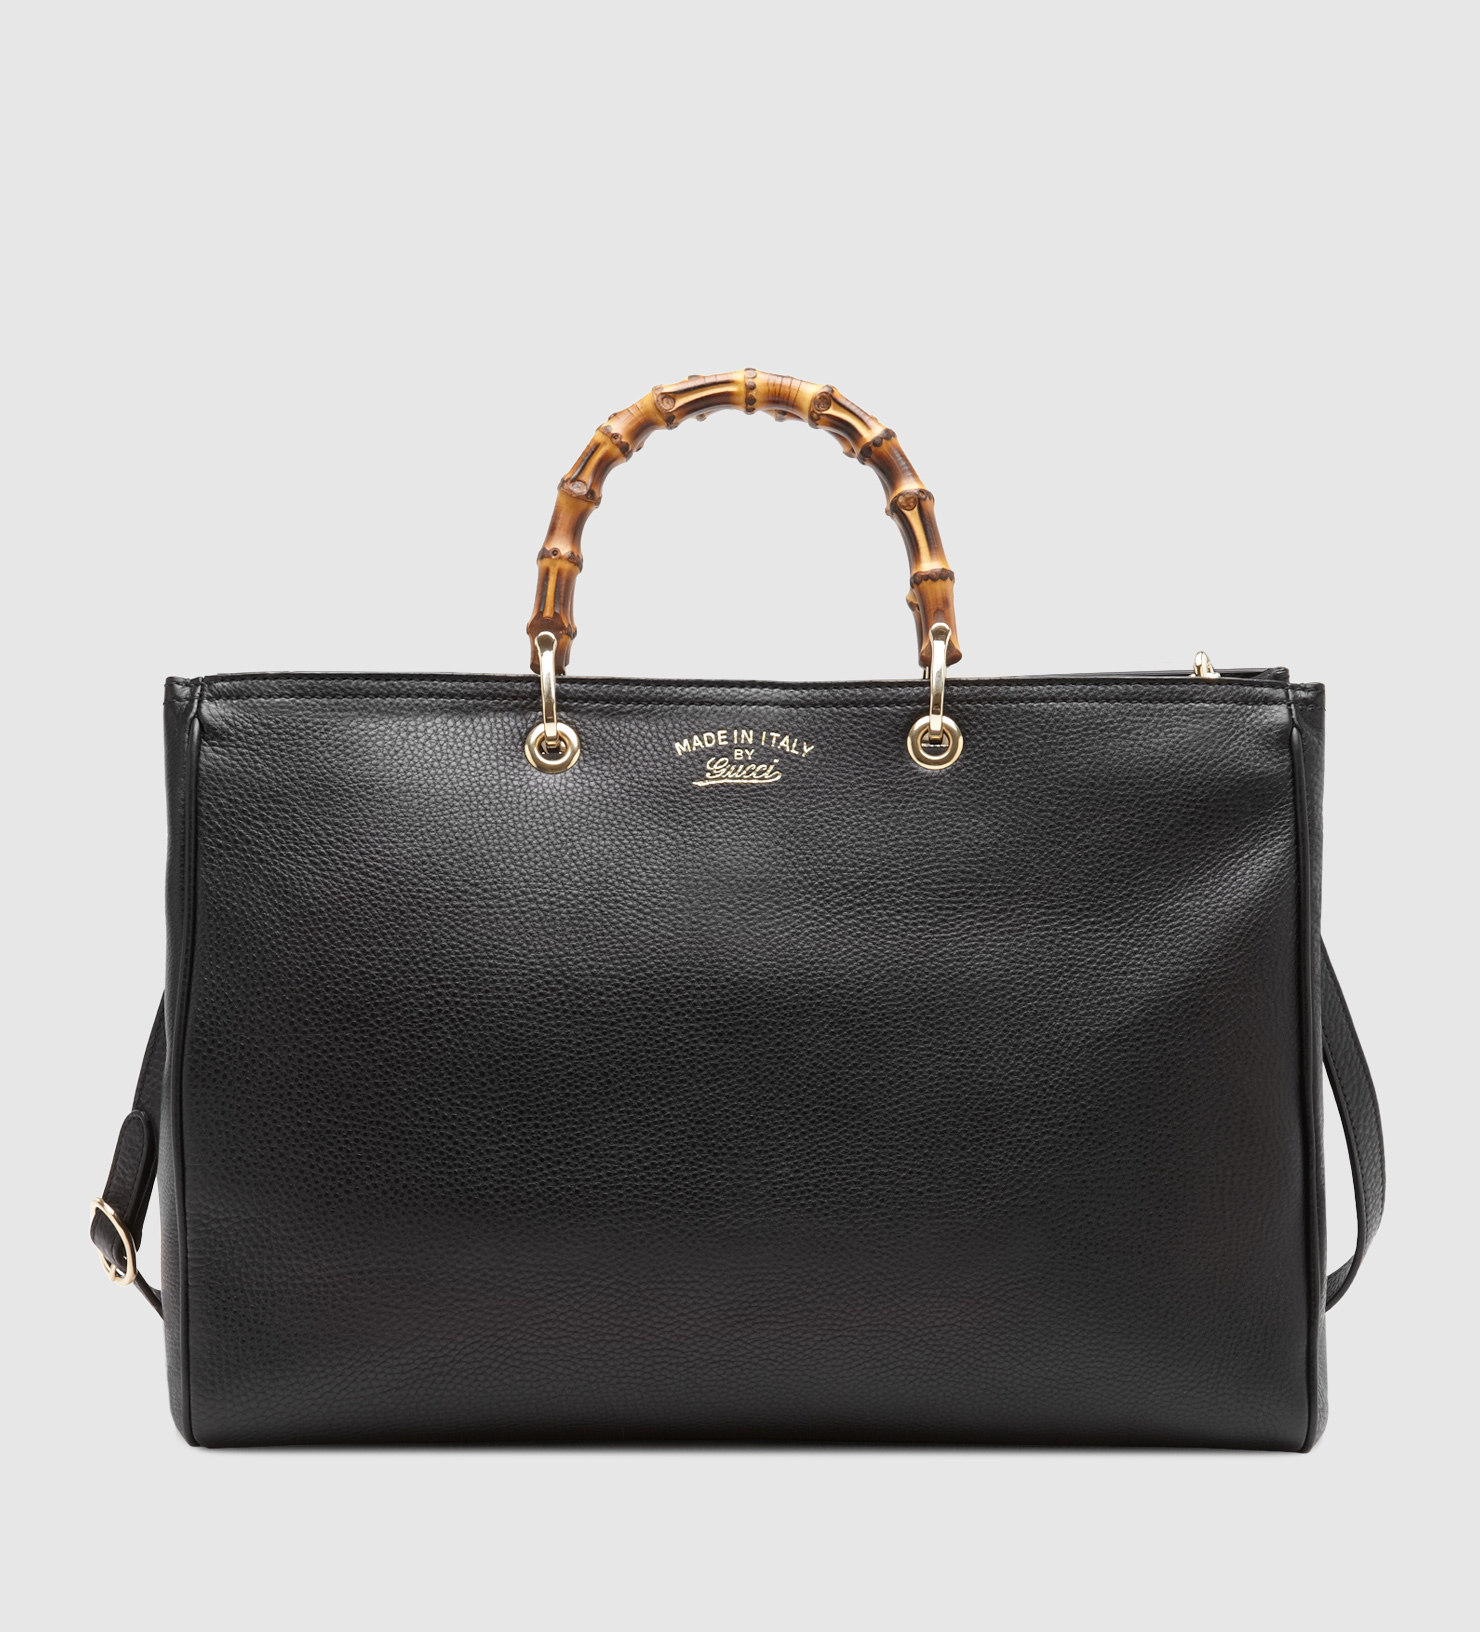 Gucci Bamboo Leather Tote in Black - Lyst